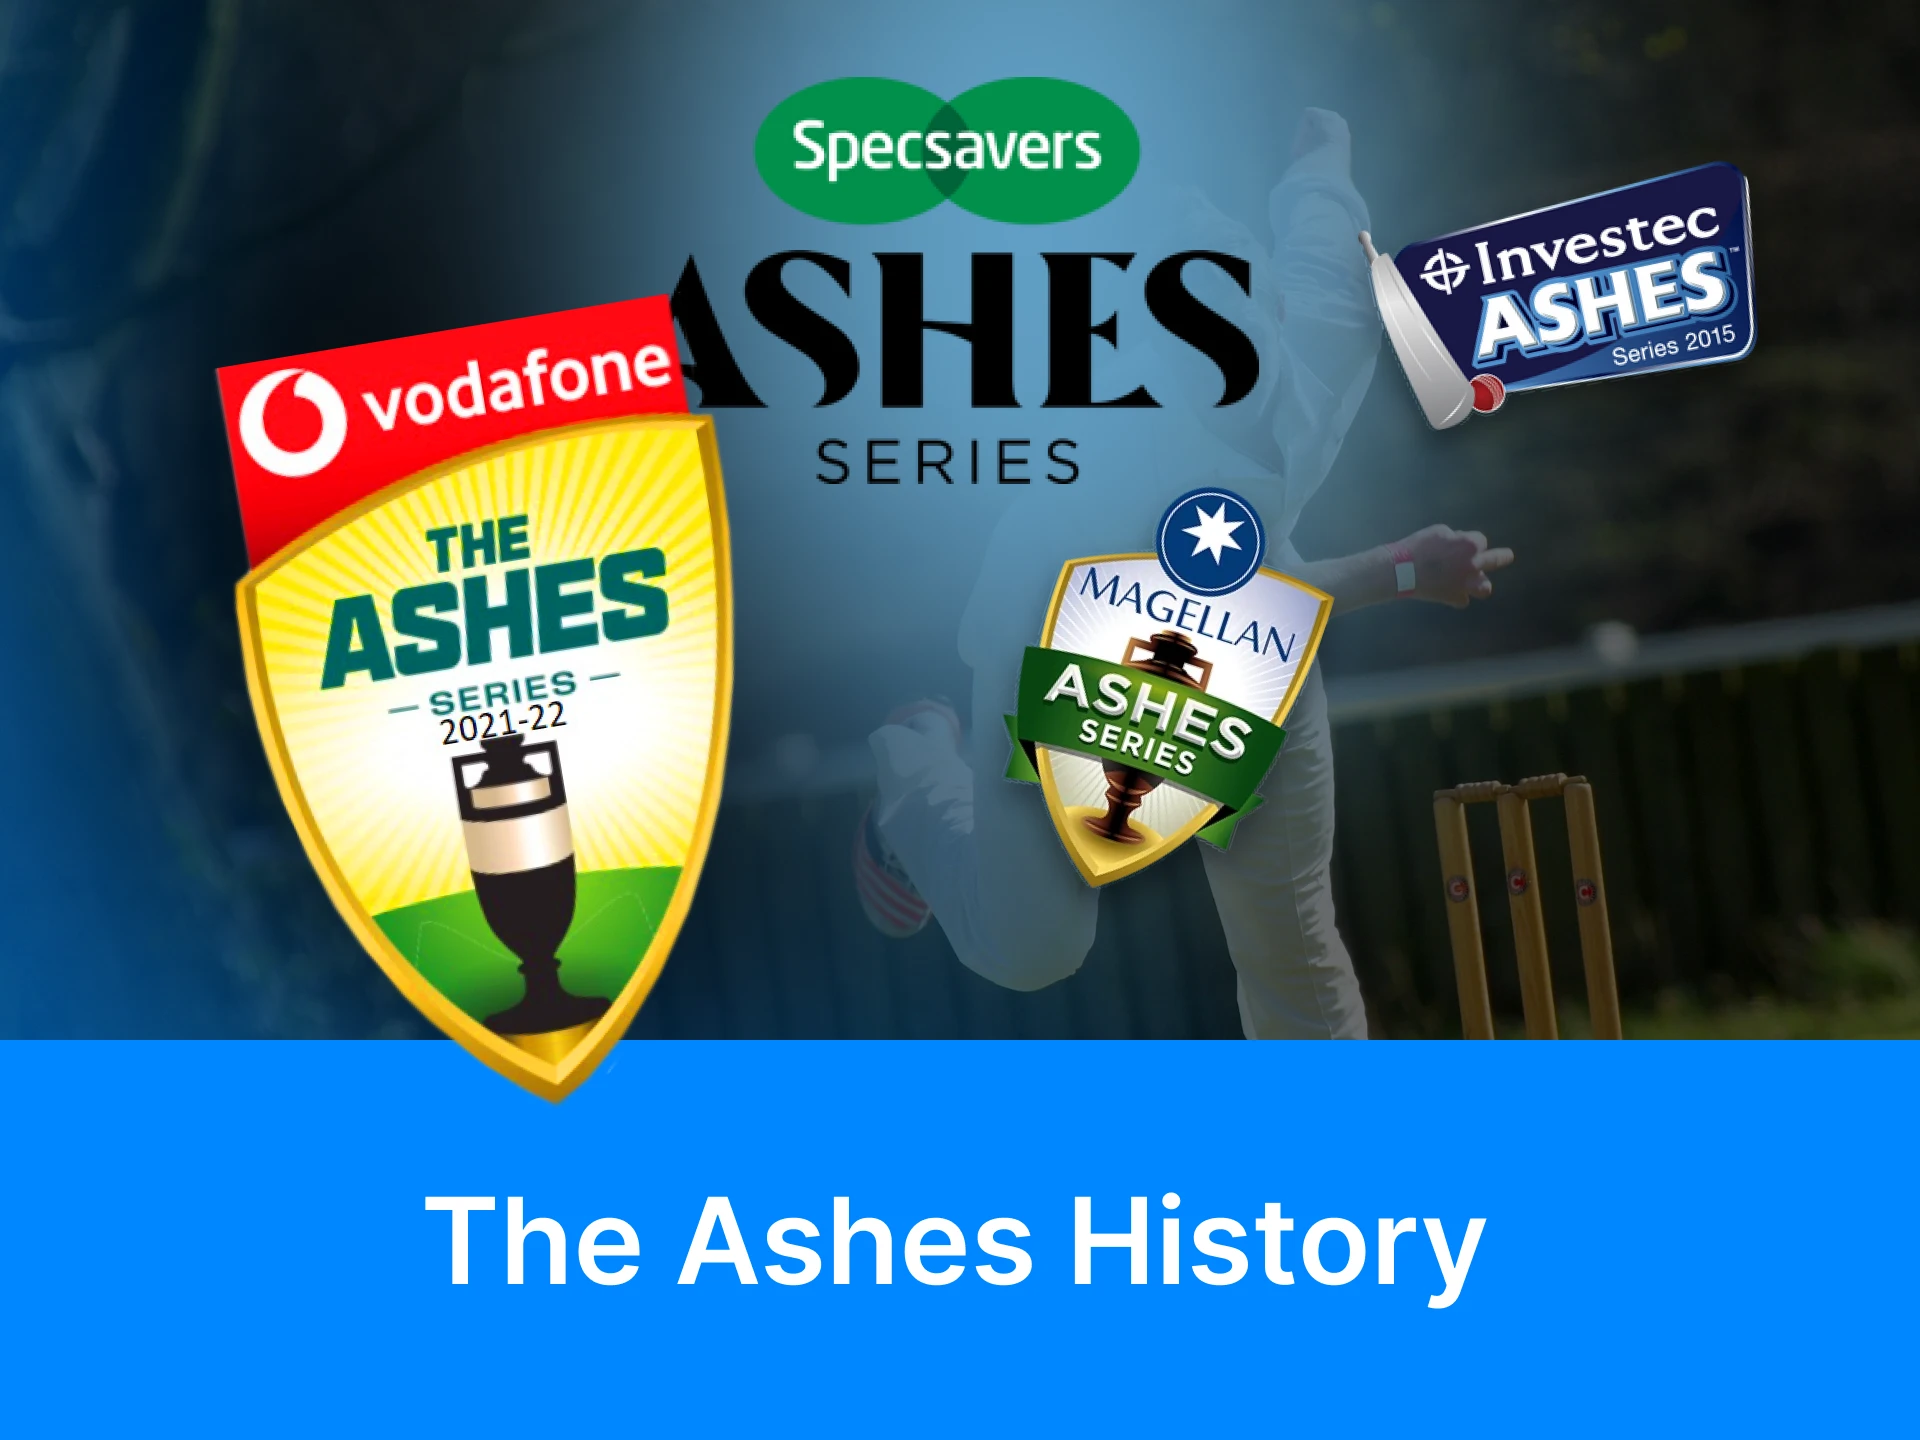 The Ashes was held as a special tournament between England and Australia.